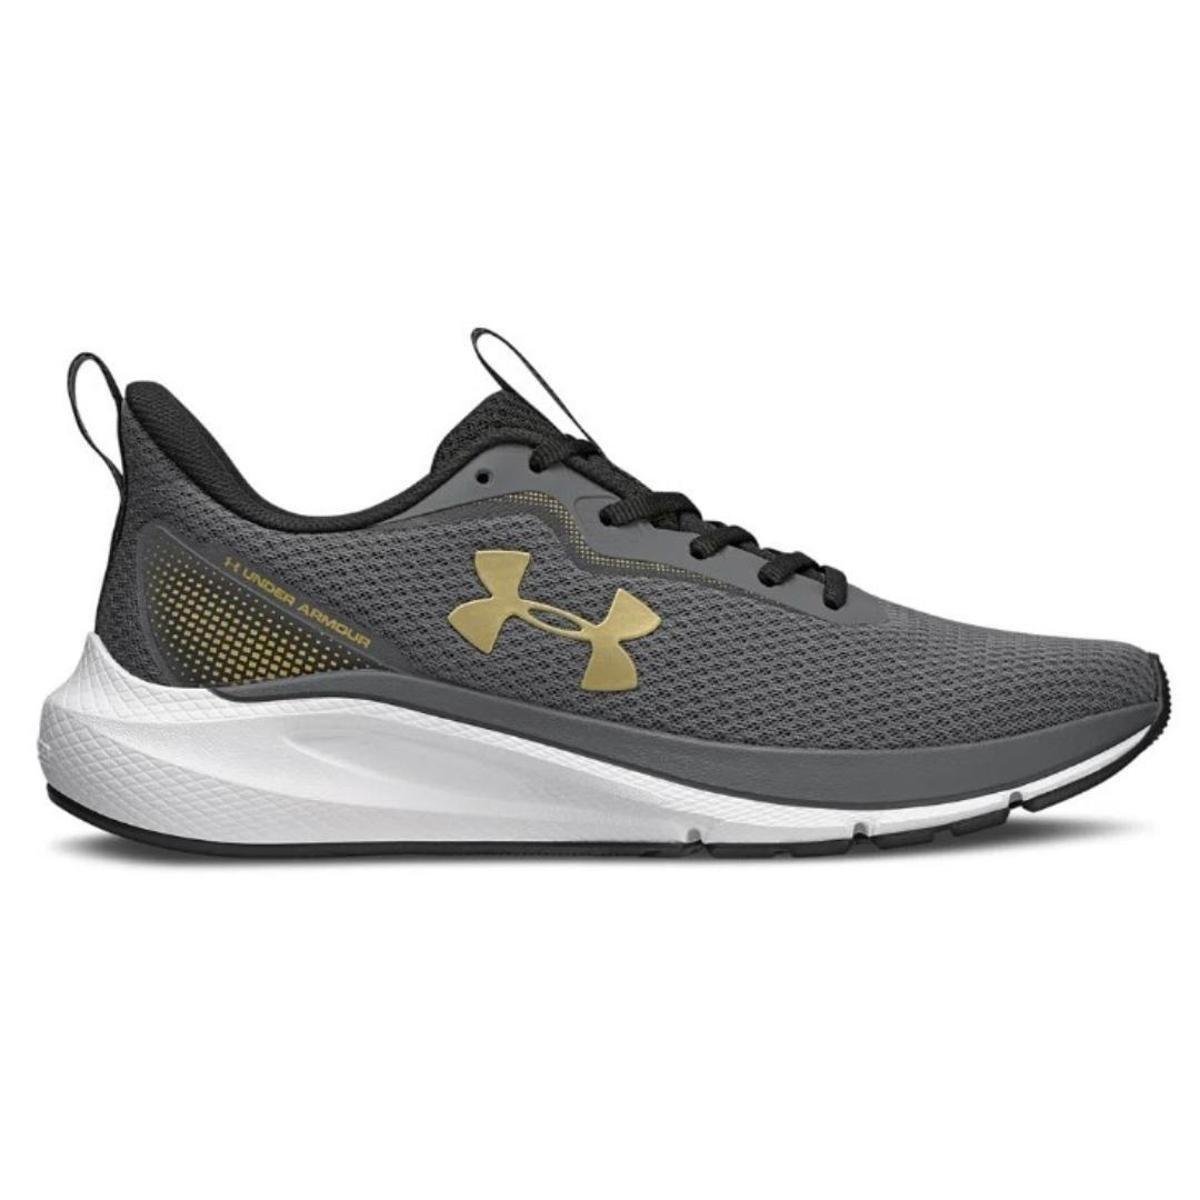 Tênis Masculino Under Armour Charged First Esportivo [Tam. 40 e 43]